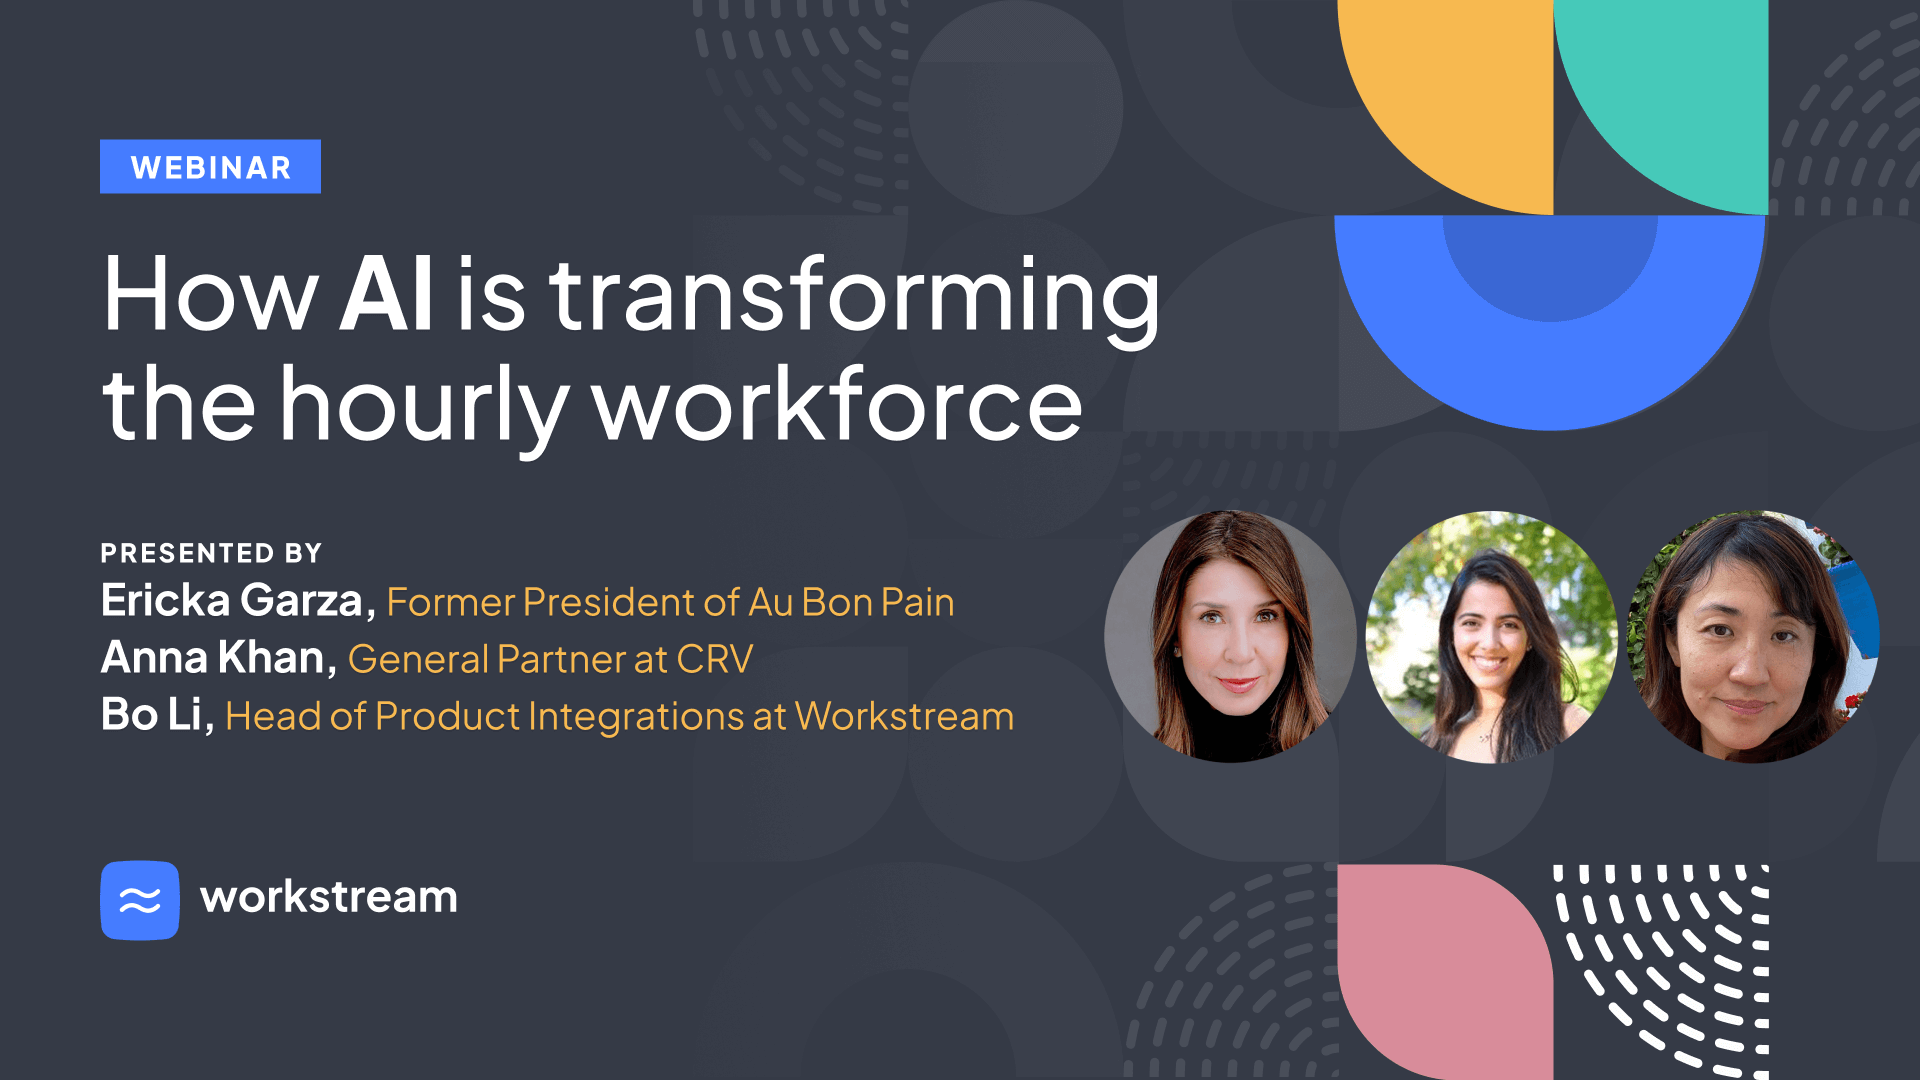 How AI is transforming the hourly workforce webinar